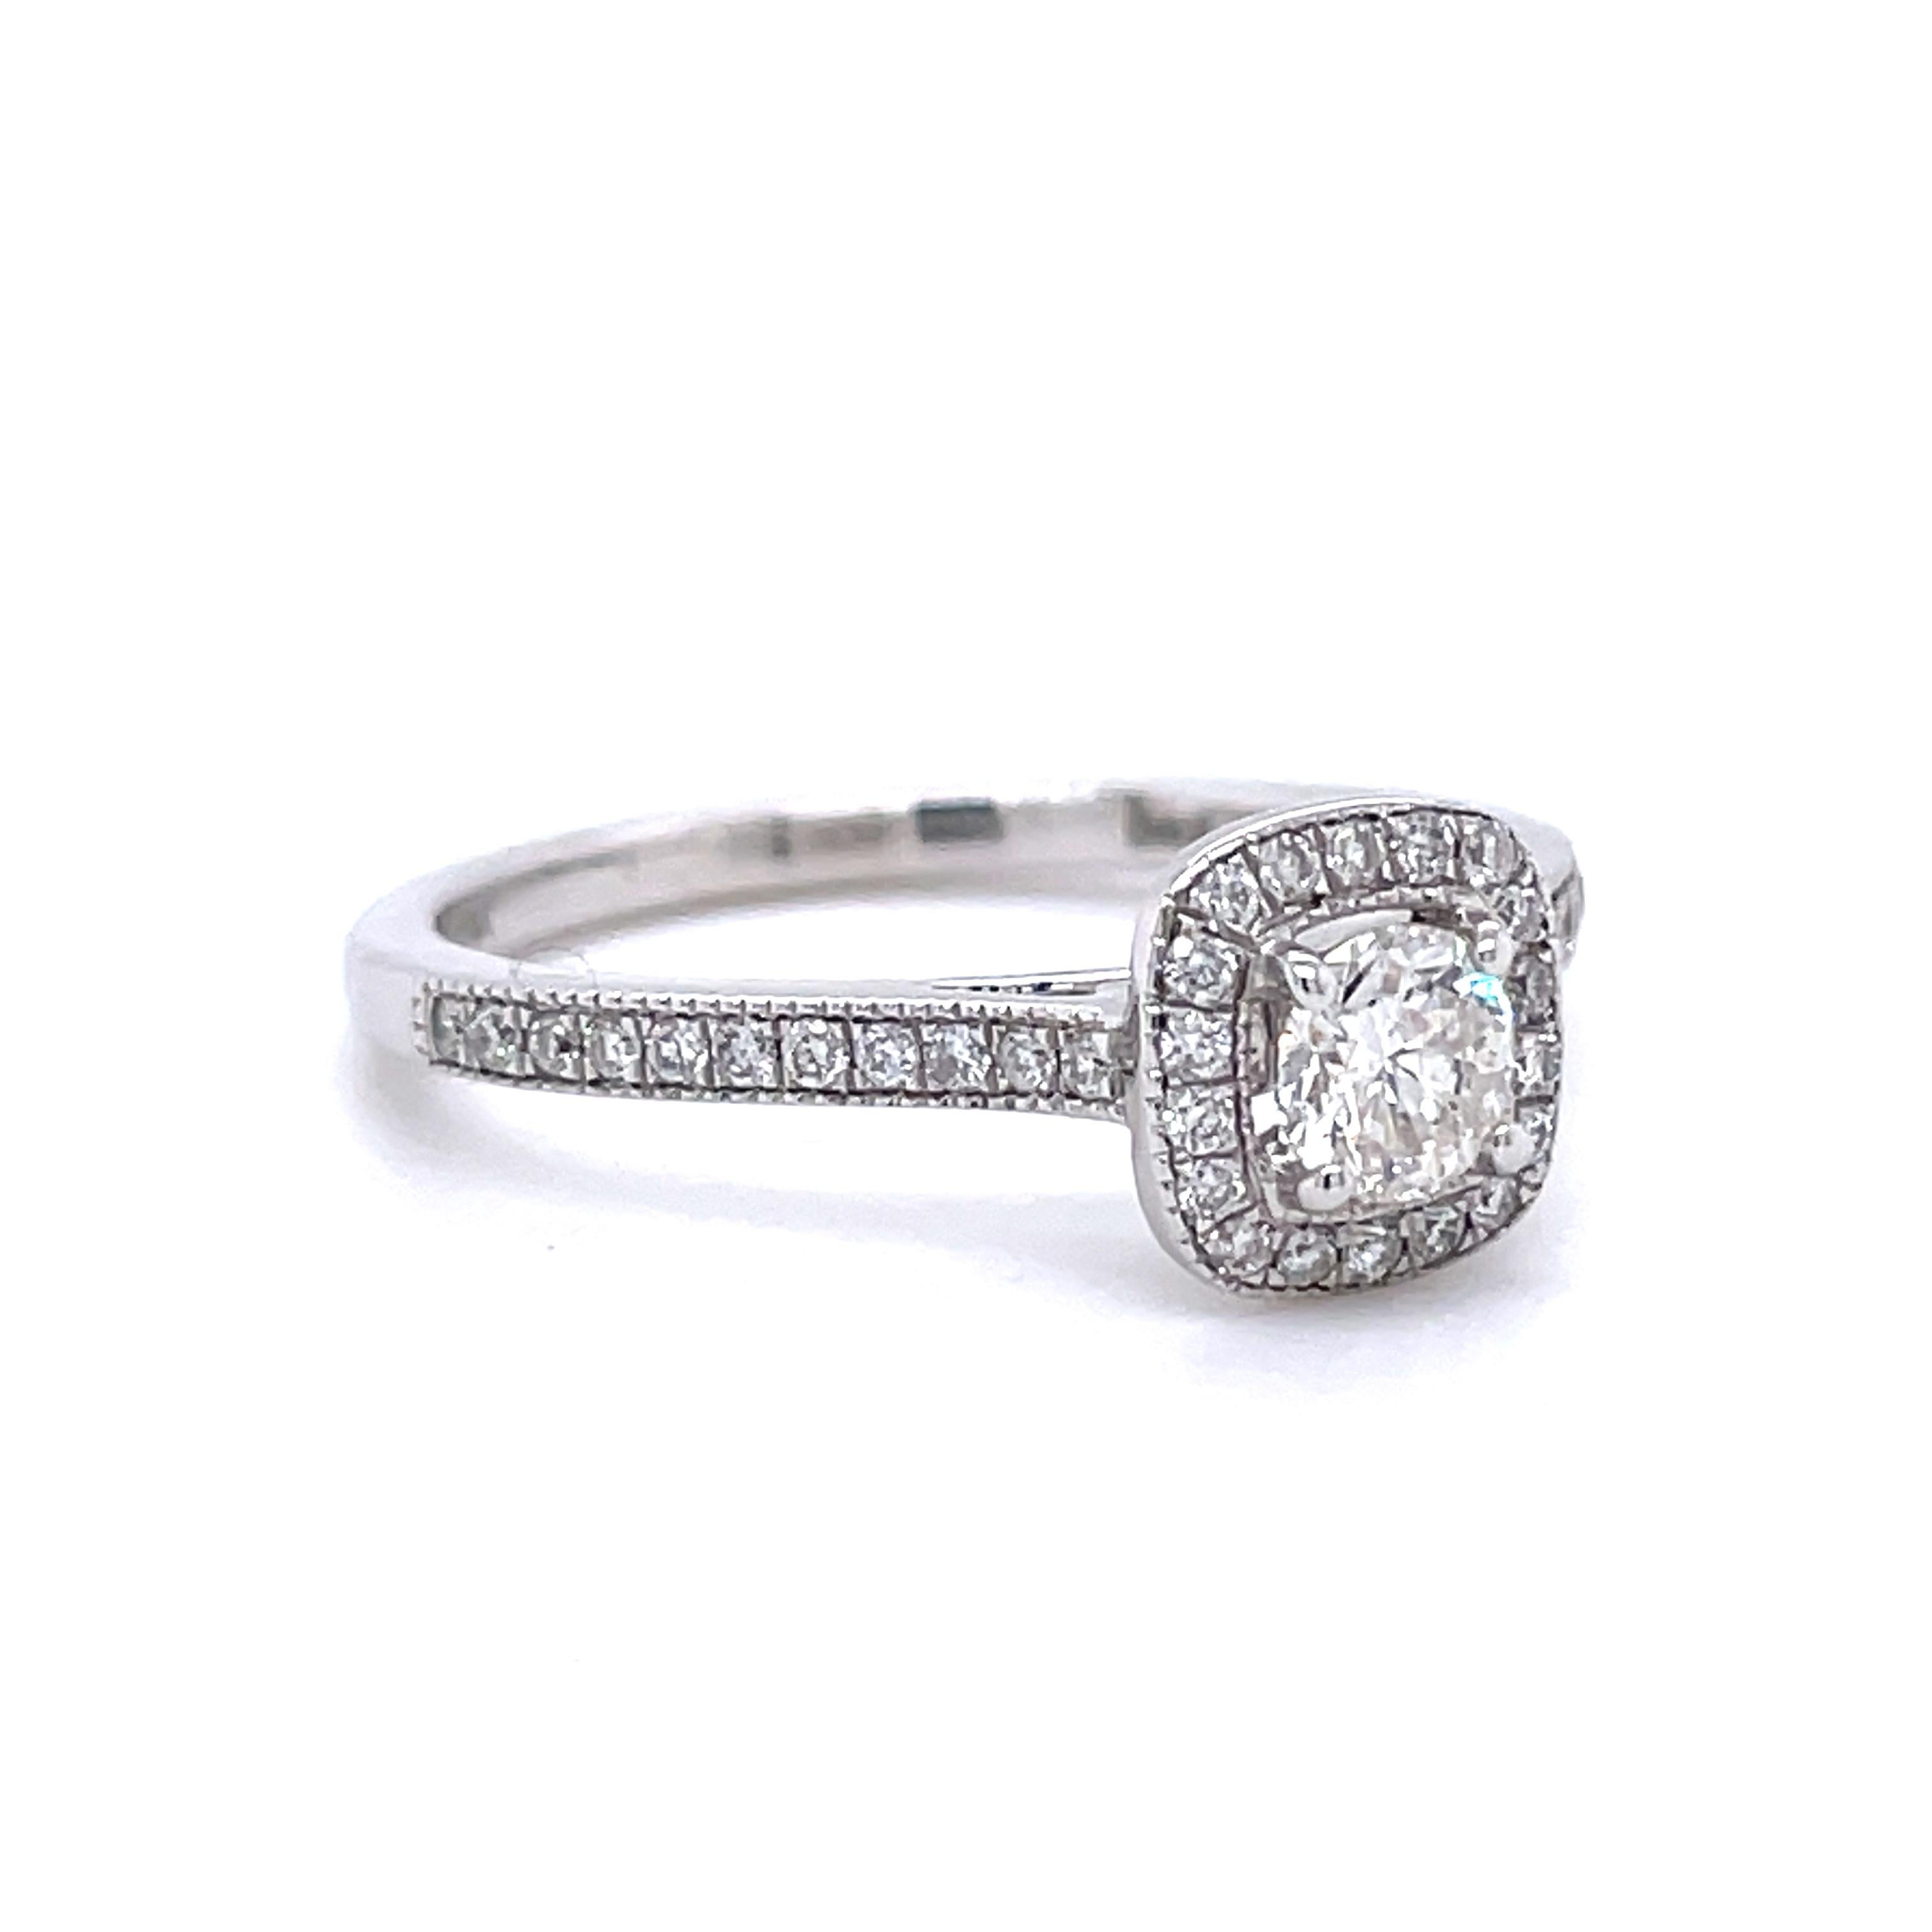 This stunning and elegant diamond ring has a beautiful 0.30 ct (H-I Color, I2 Clarity) round brilliant diamond in the center with an additional 40 diamonds weighing 0.21 cttw (H-I Color, I1 Clarity) accenting the sides and halo. The ring is crafted